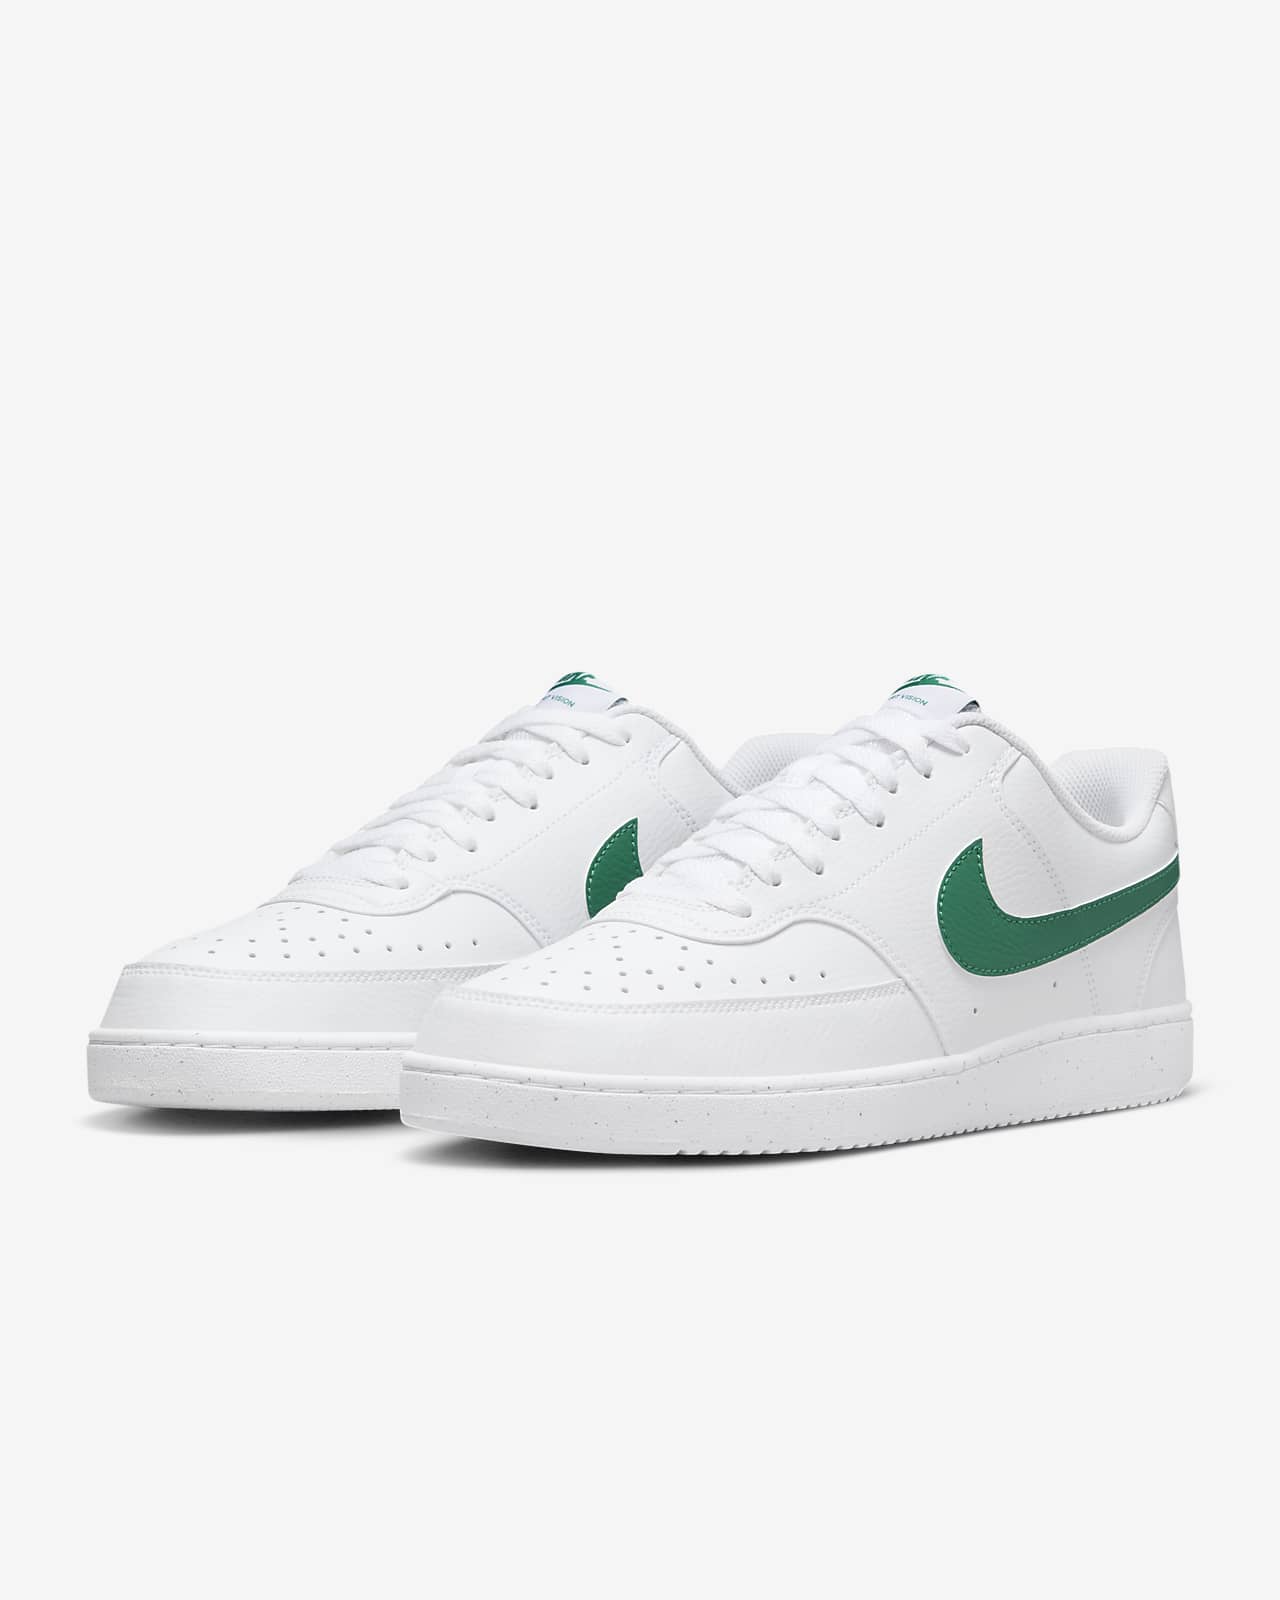 Top more than 286 mens nike sneakers white latest